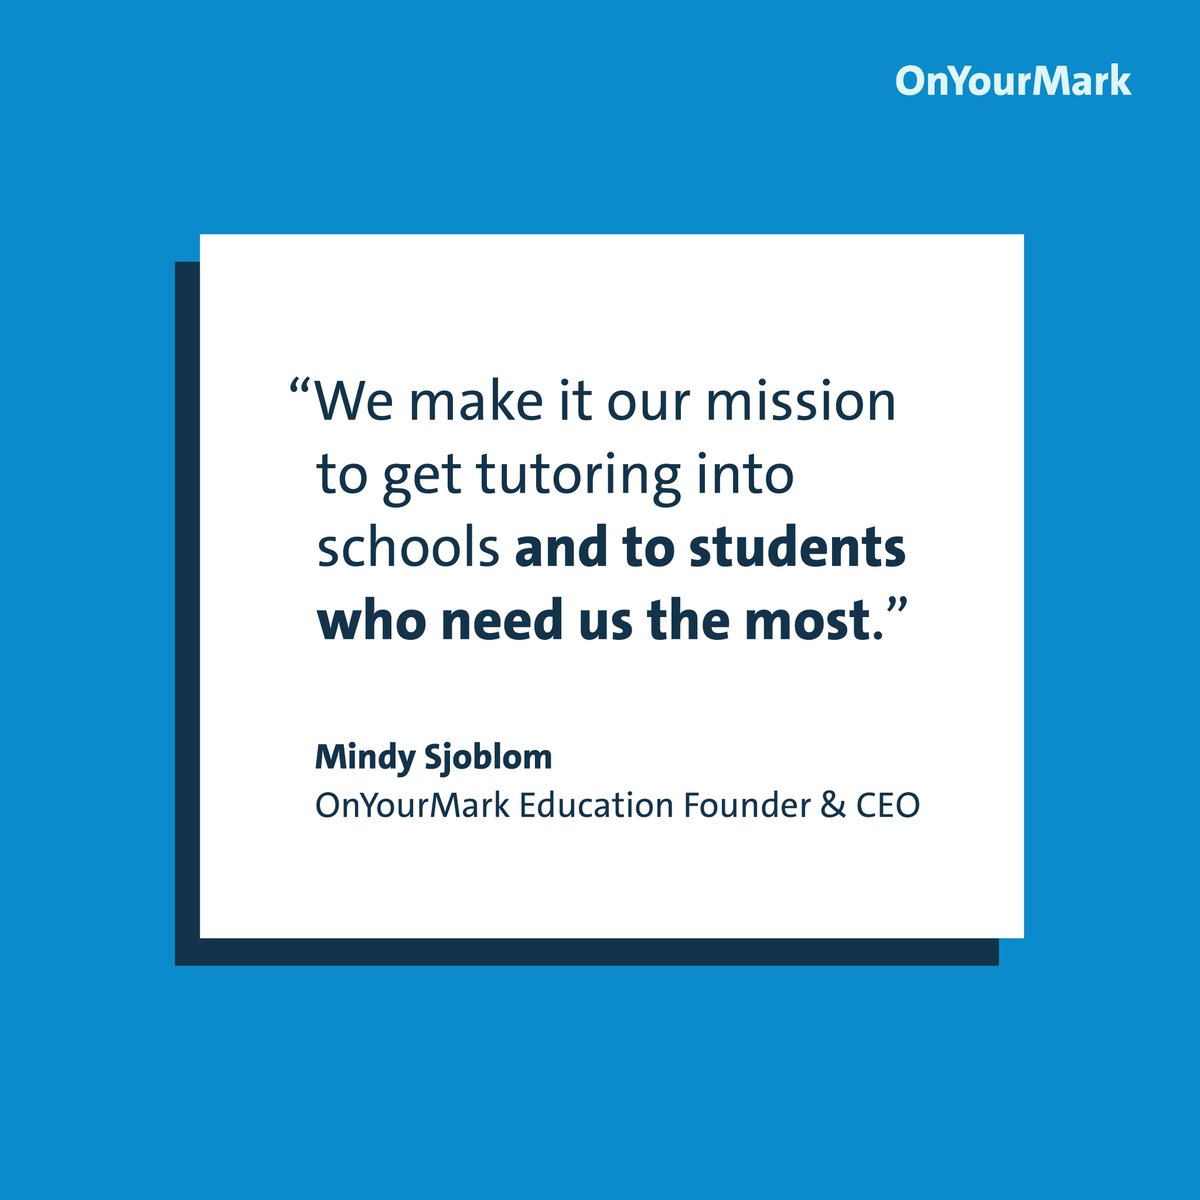 OnYourMark Education is helping to close the reading gap by providing accessible, personalized tutoring during the school day. dell.org/story/onyourma…